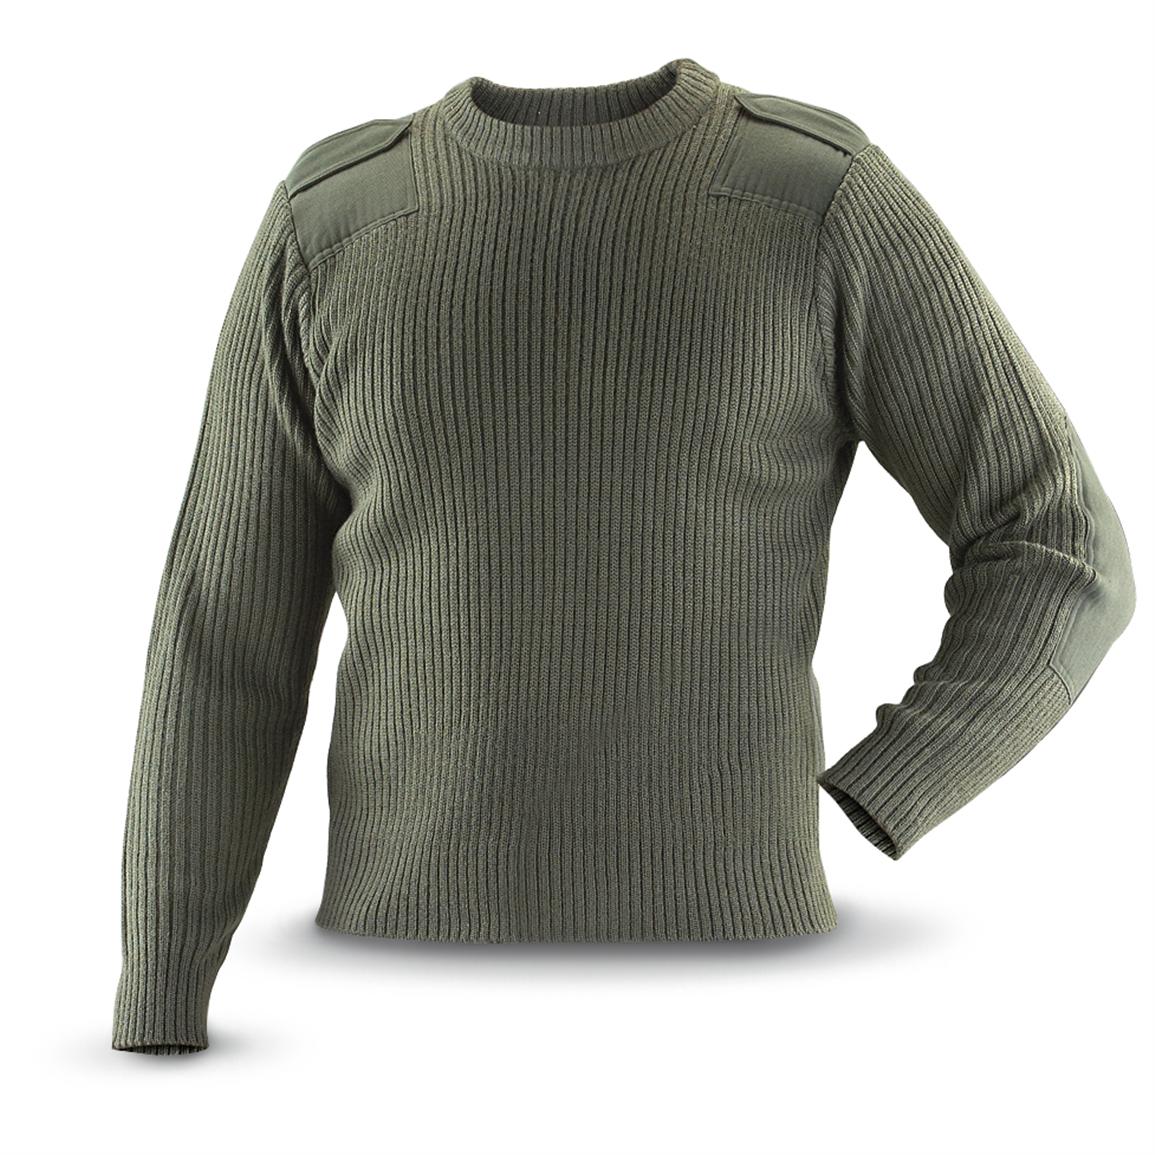 Knox Armory Men's Commando Sweater - 190937, Sweaters at Sportsman's Guide